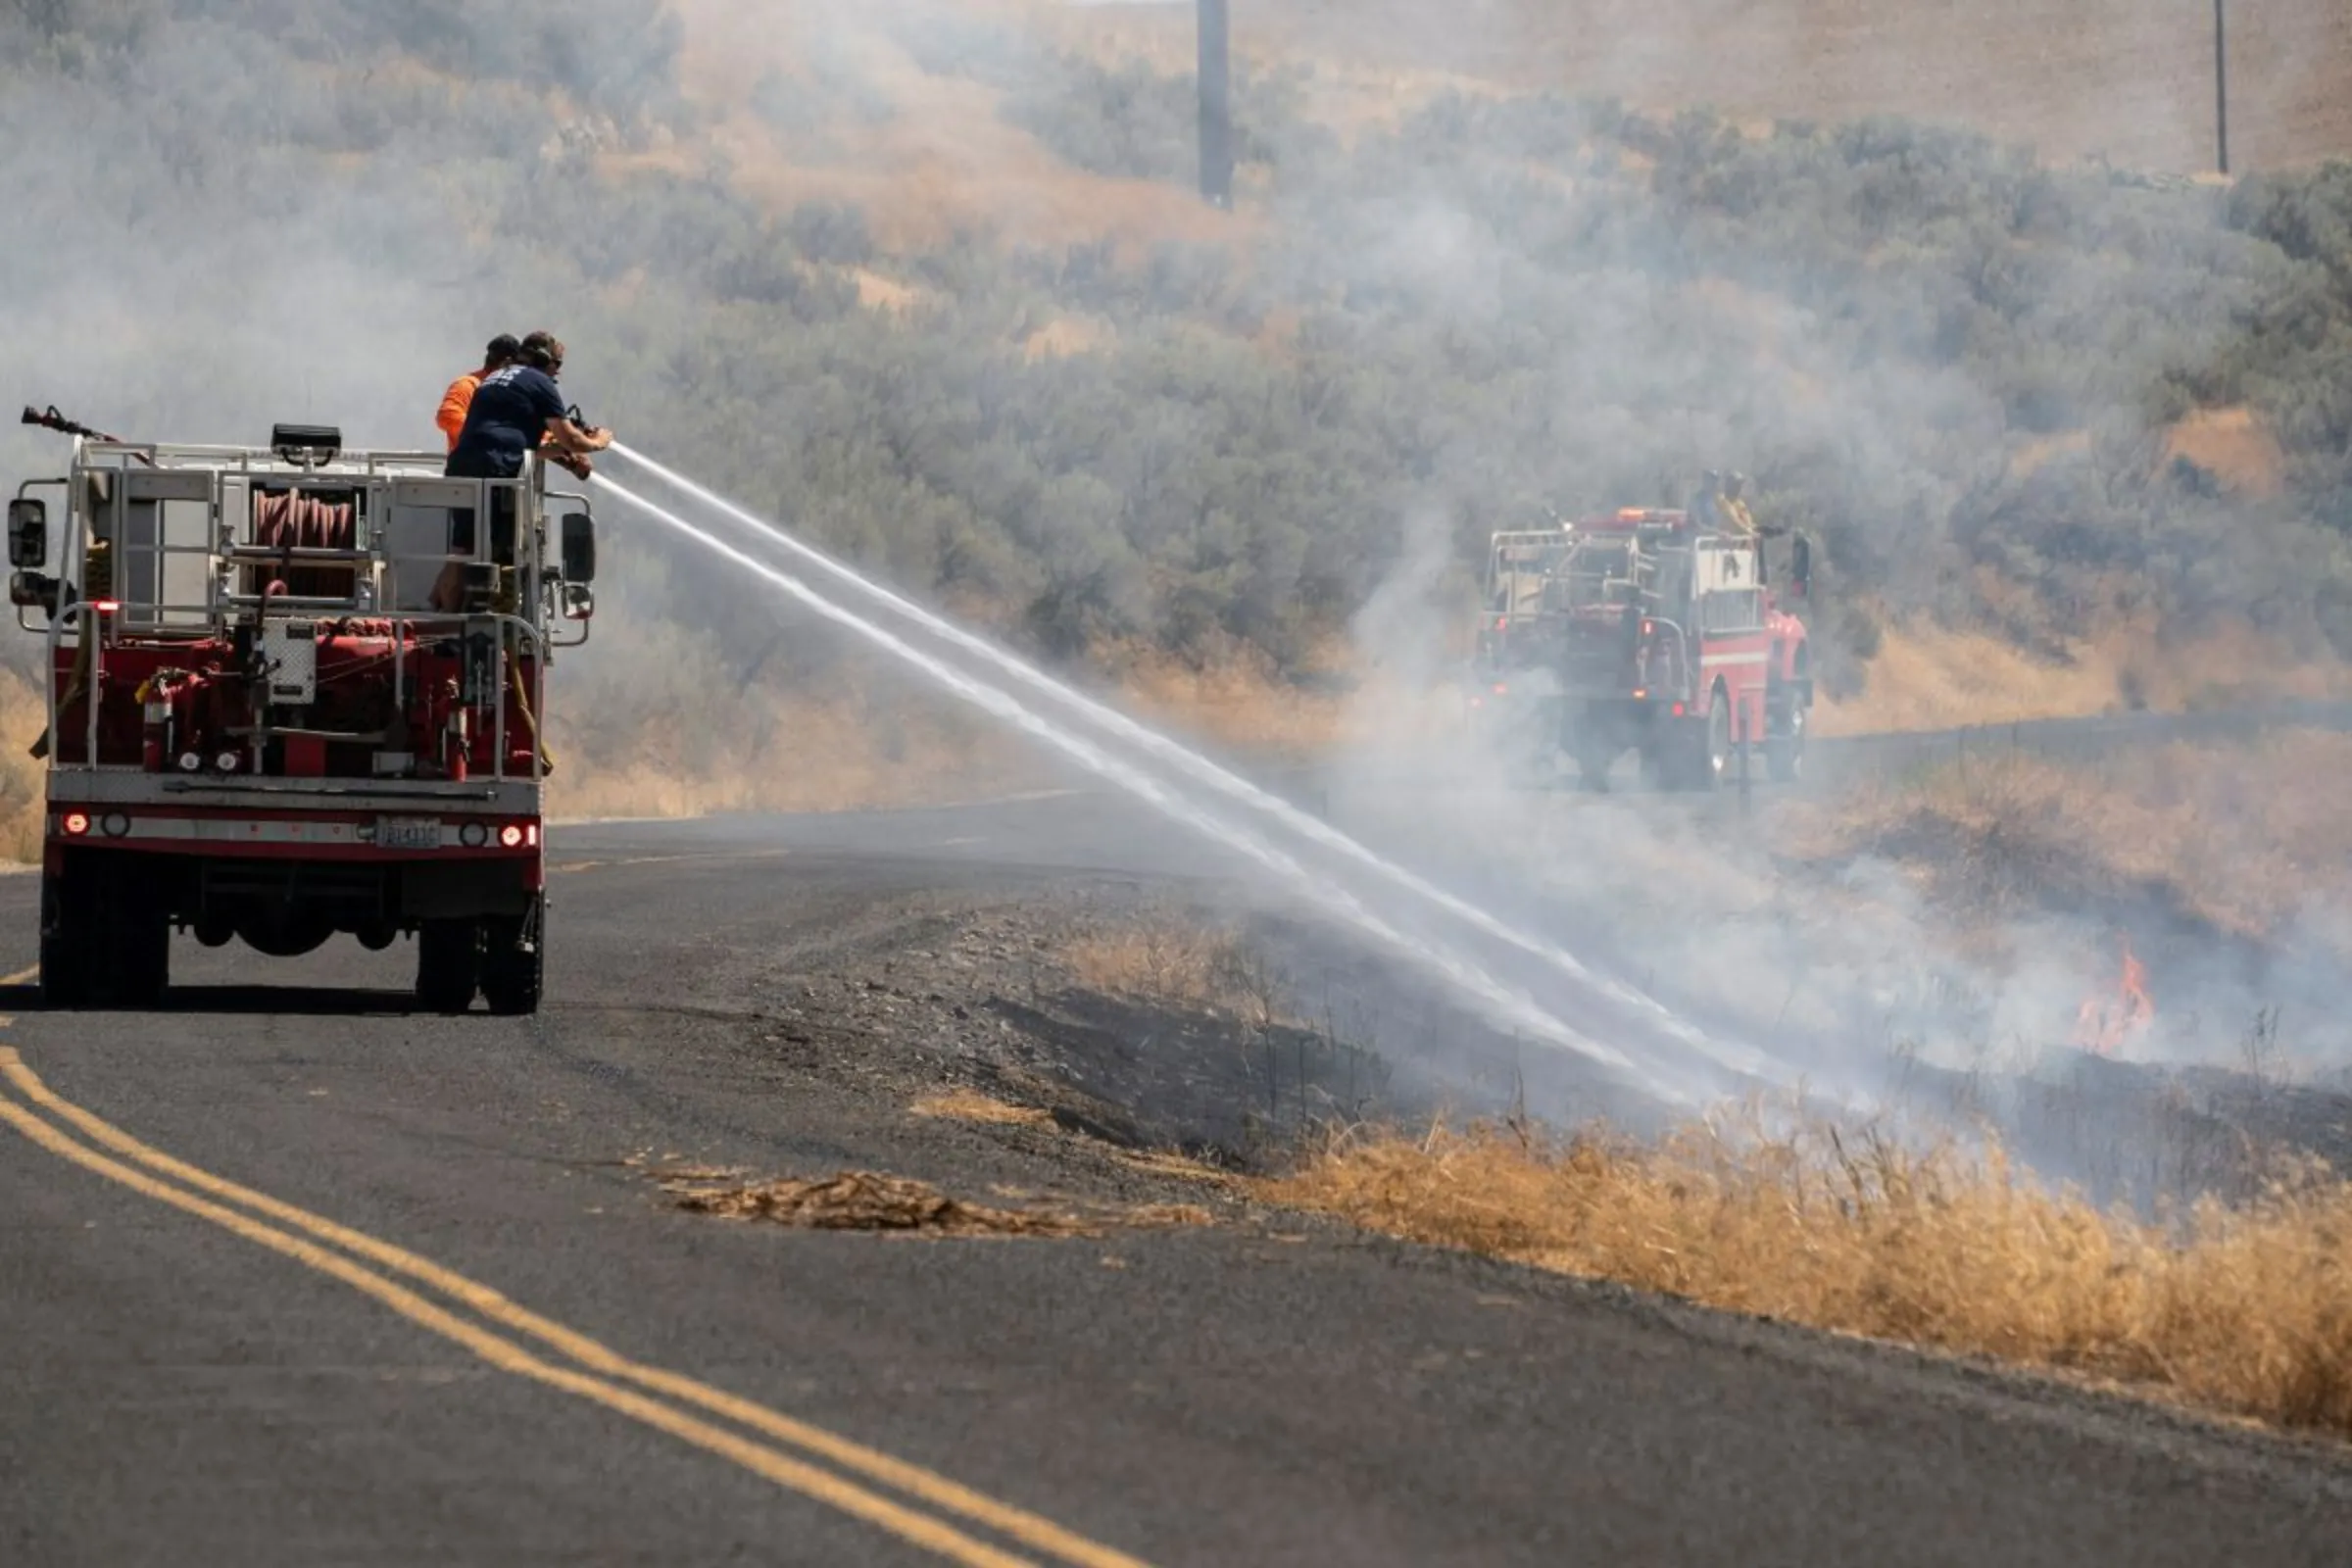 A firefighter truck extinguishes a flare up along a country road a day after a wildfire in the town of Lind, Washington, U.S., August 5, 2022. REUTERS/David Ryder